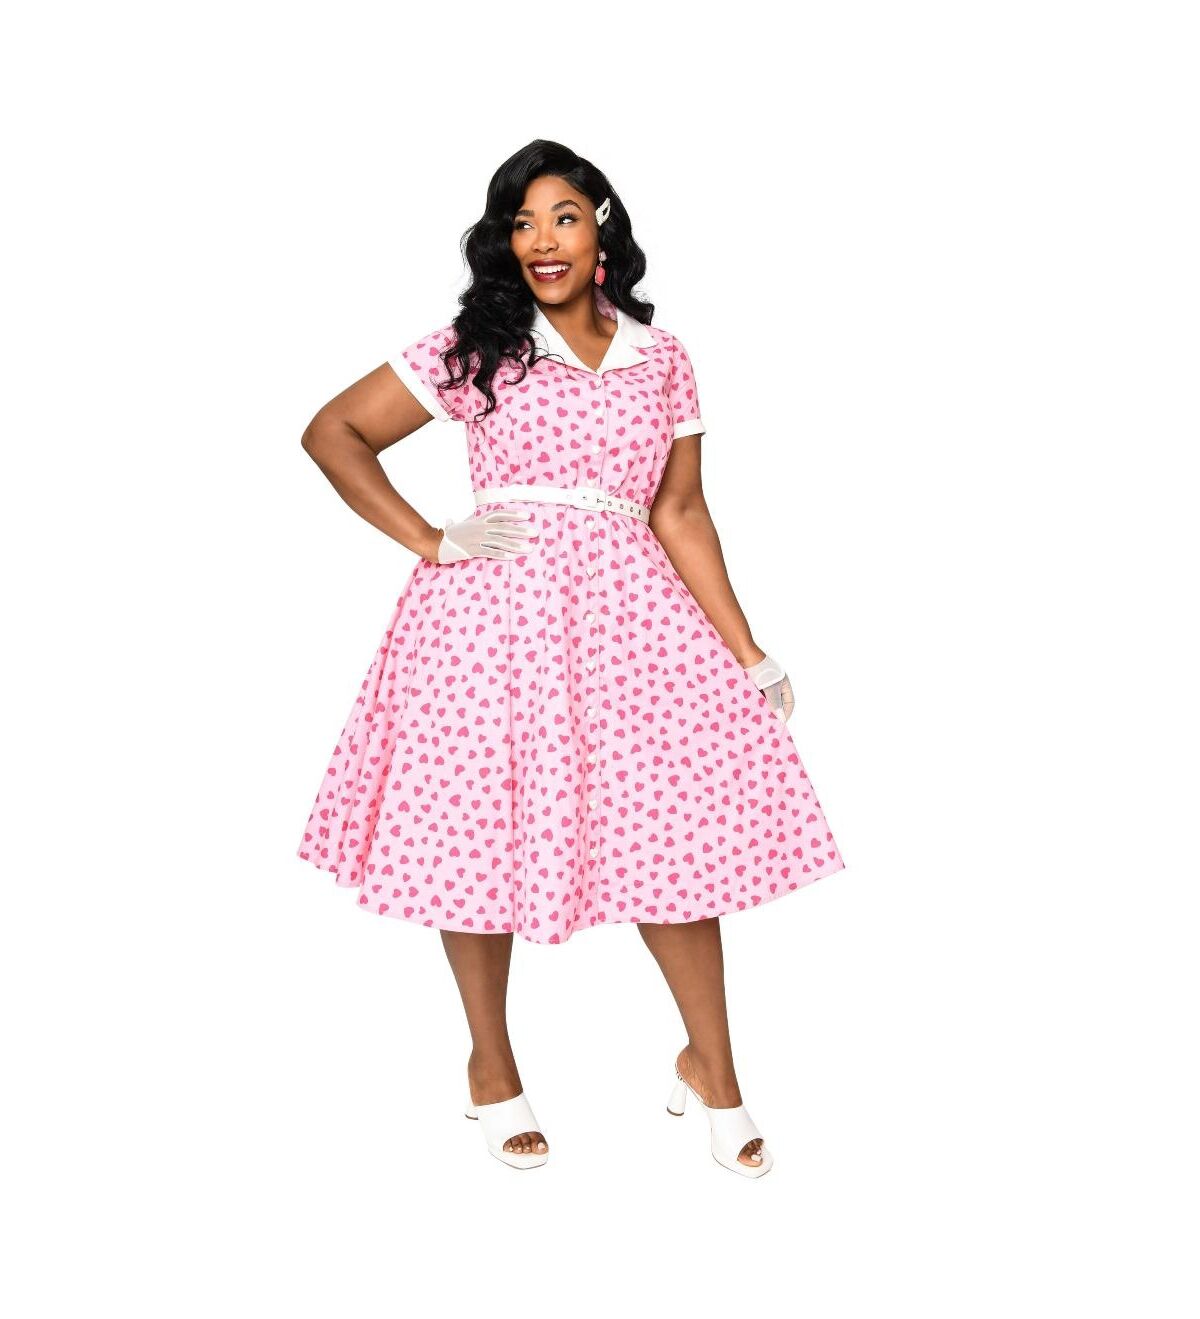 Unique Vintage Plus Size Collared Short Sleeved Belted Alexis Swing Dress - Light pink/hot pink hearts